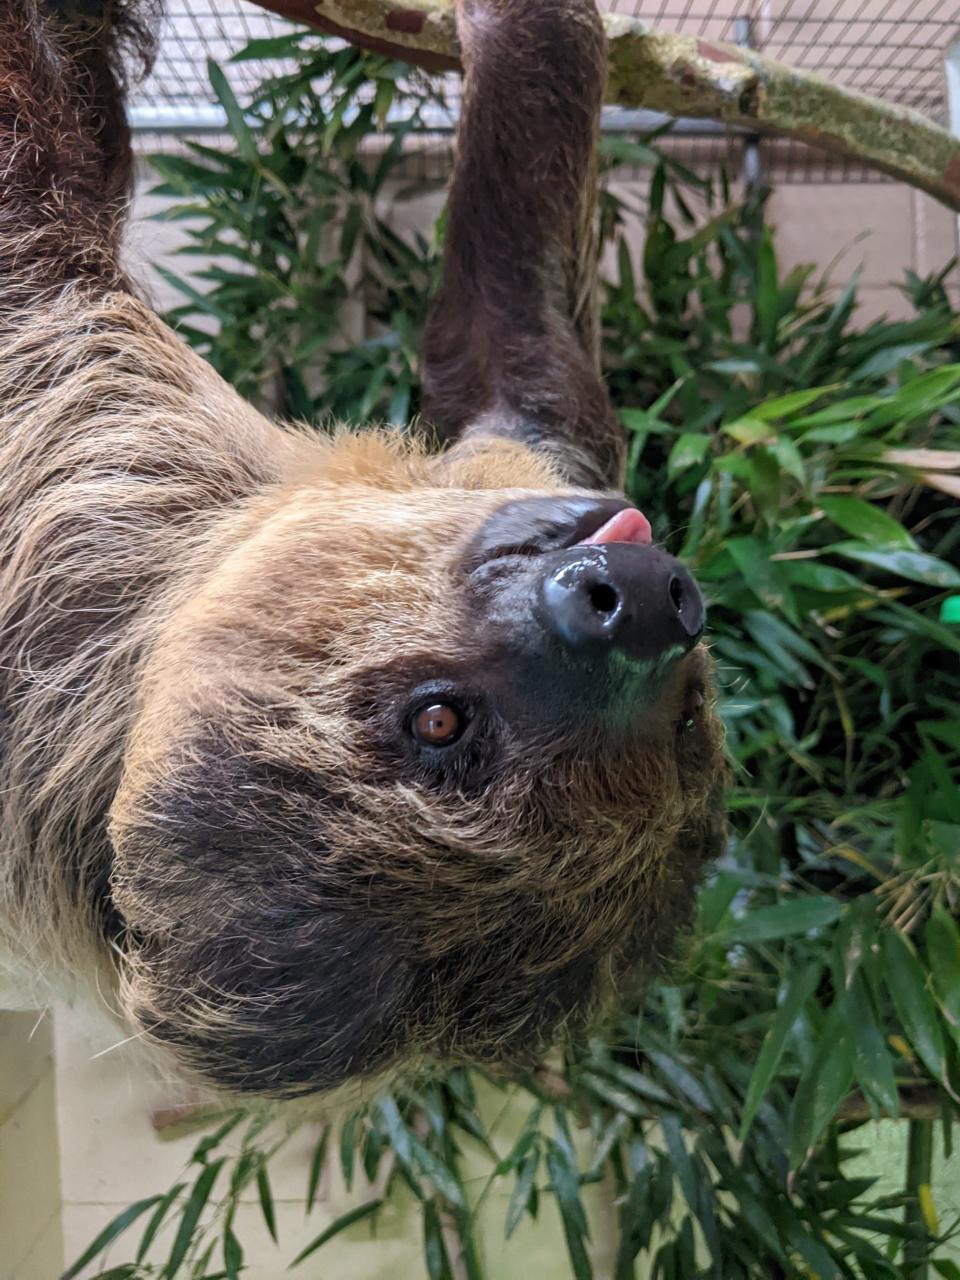 The Salisbury Zoo's newest resident is Bayou, a two-toed sloth who has come from the Audubon Zoo.